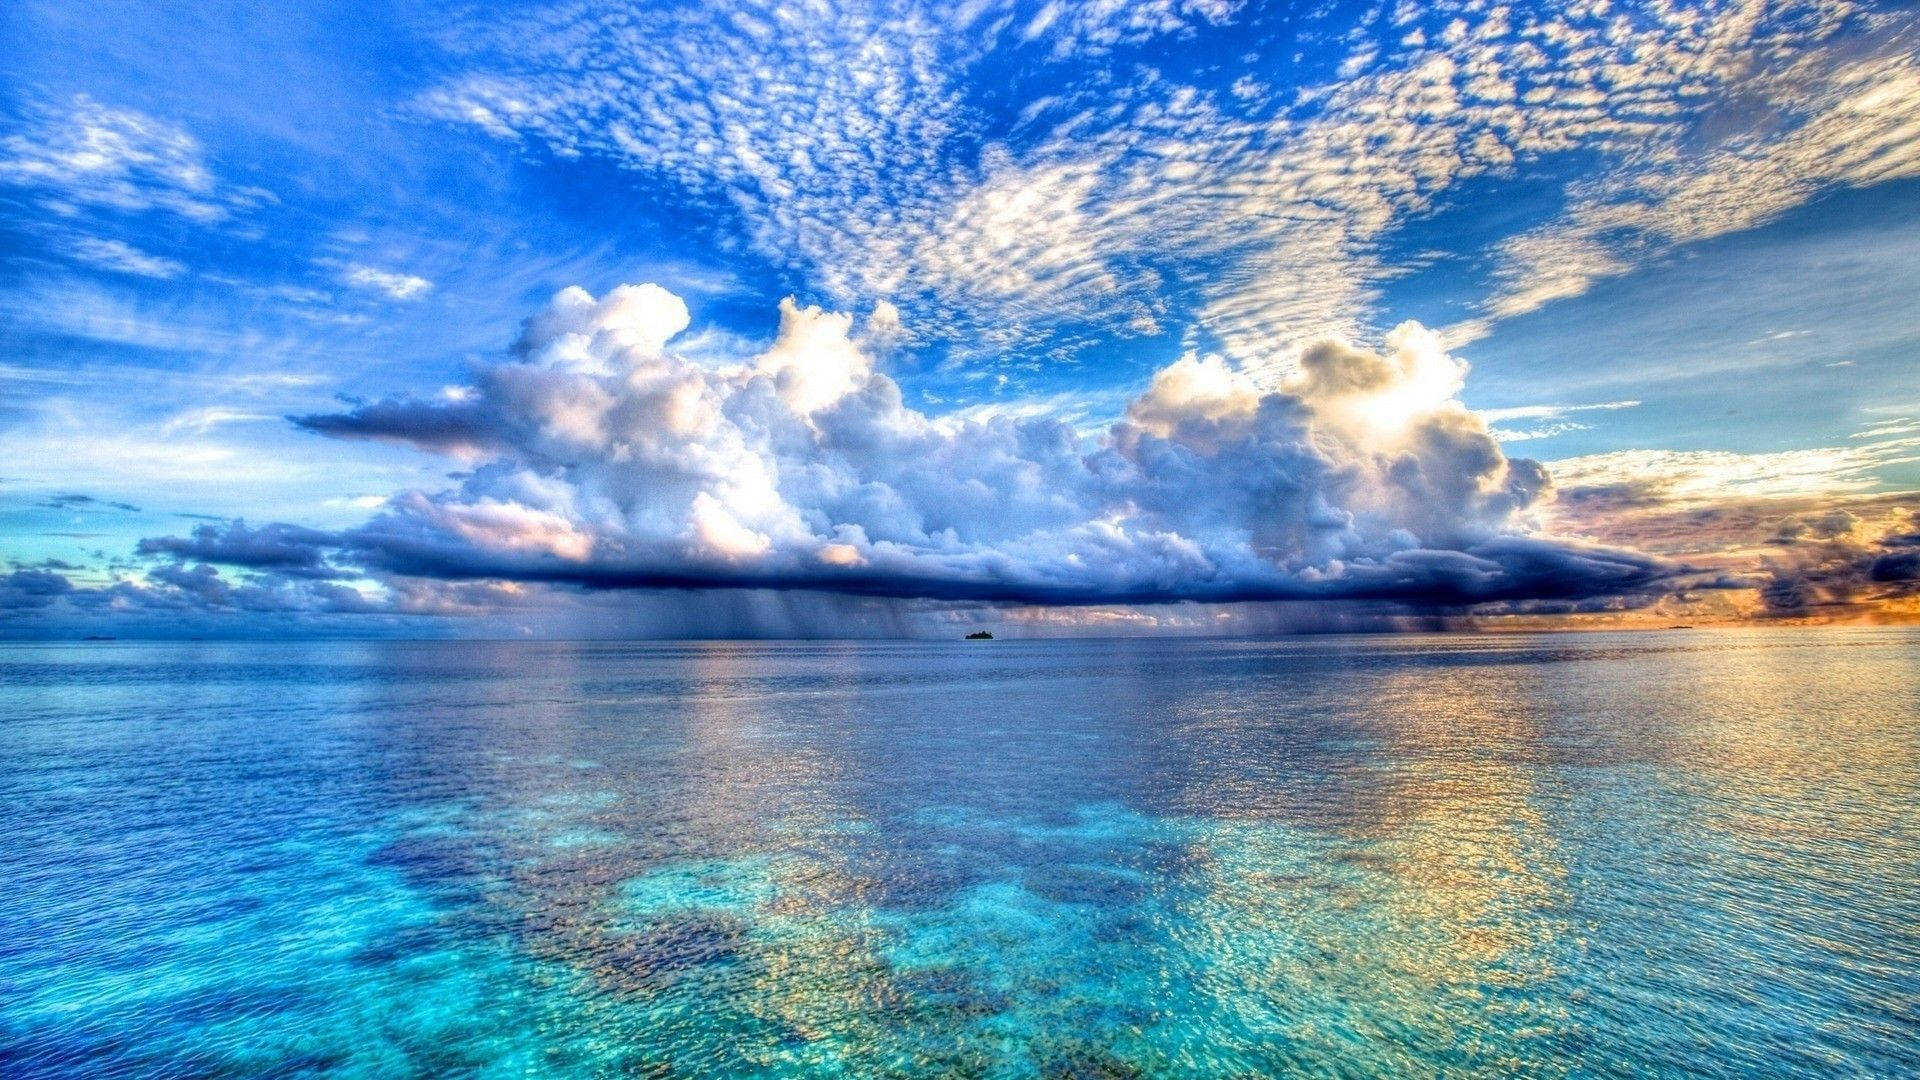 Aesthetic Ocean And Cloudy Sky Background